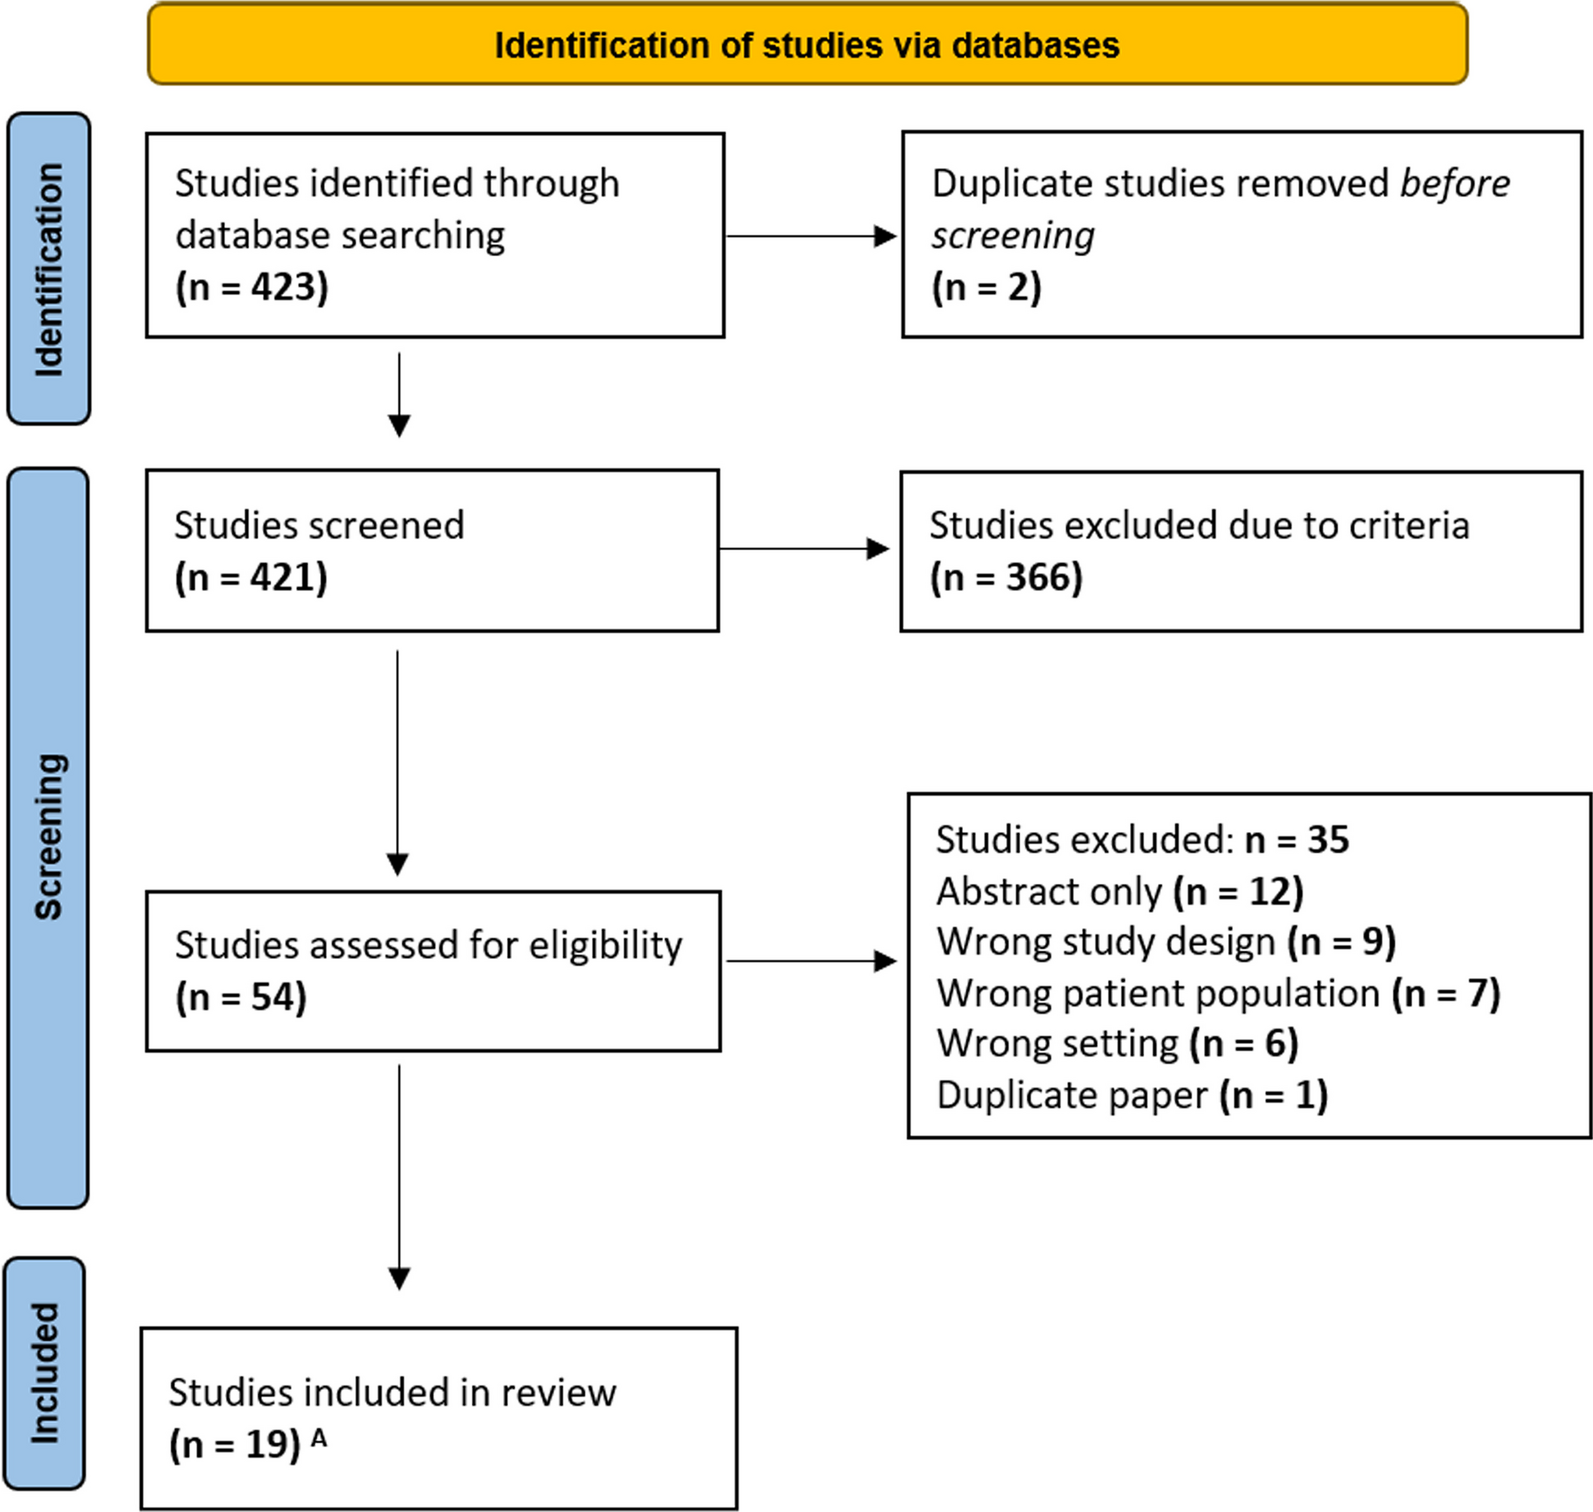 A systematic review of endometrial cancer clinical research in Africa